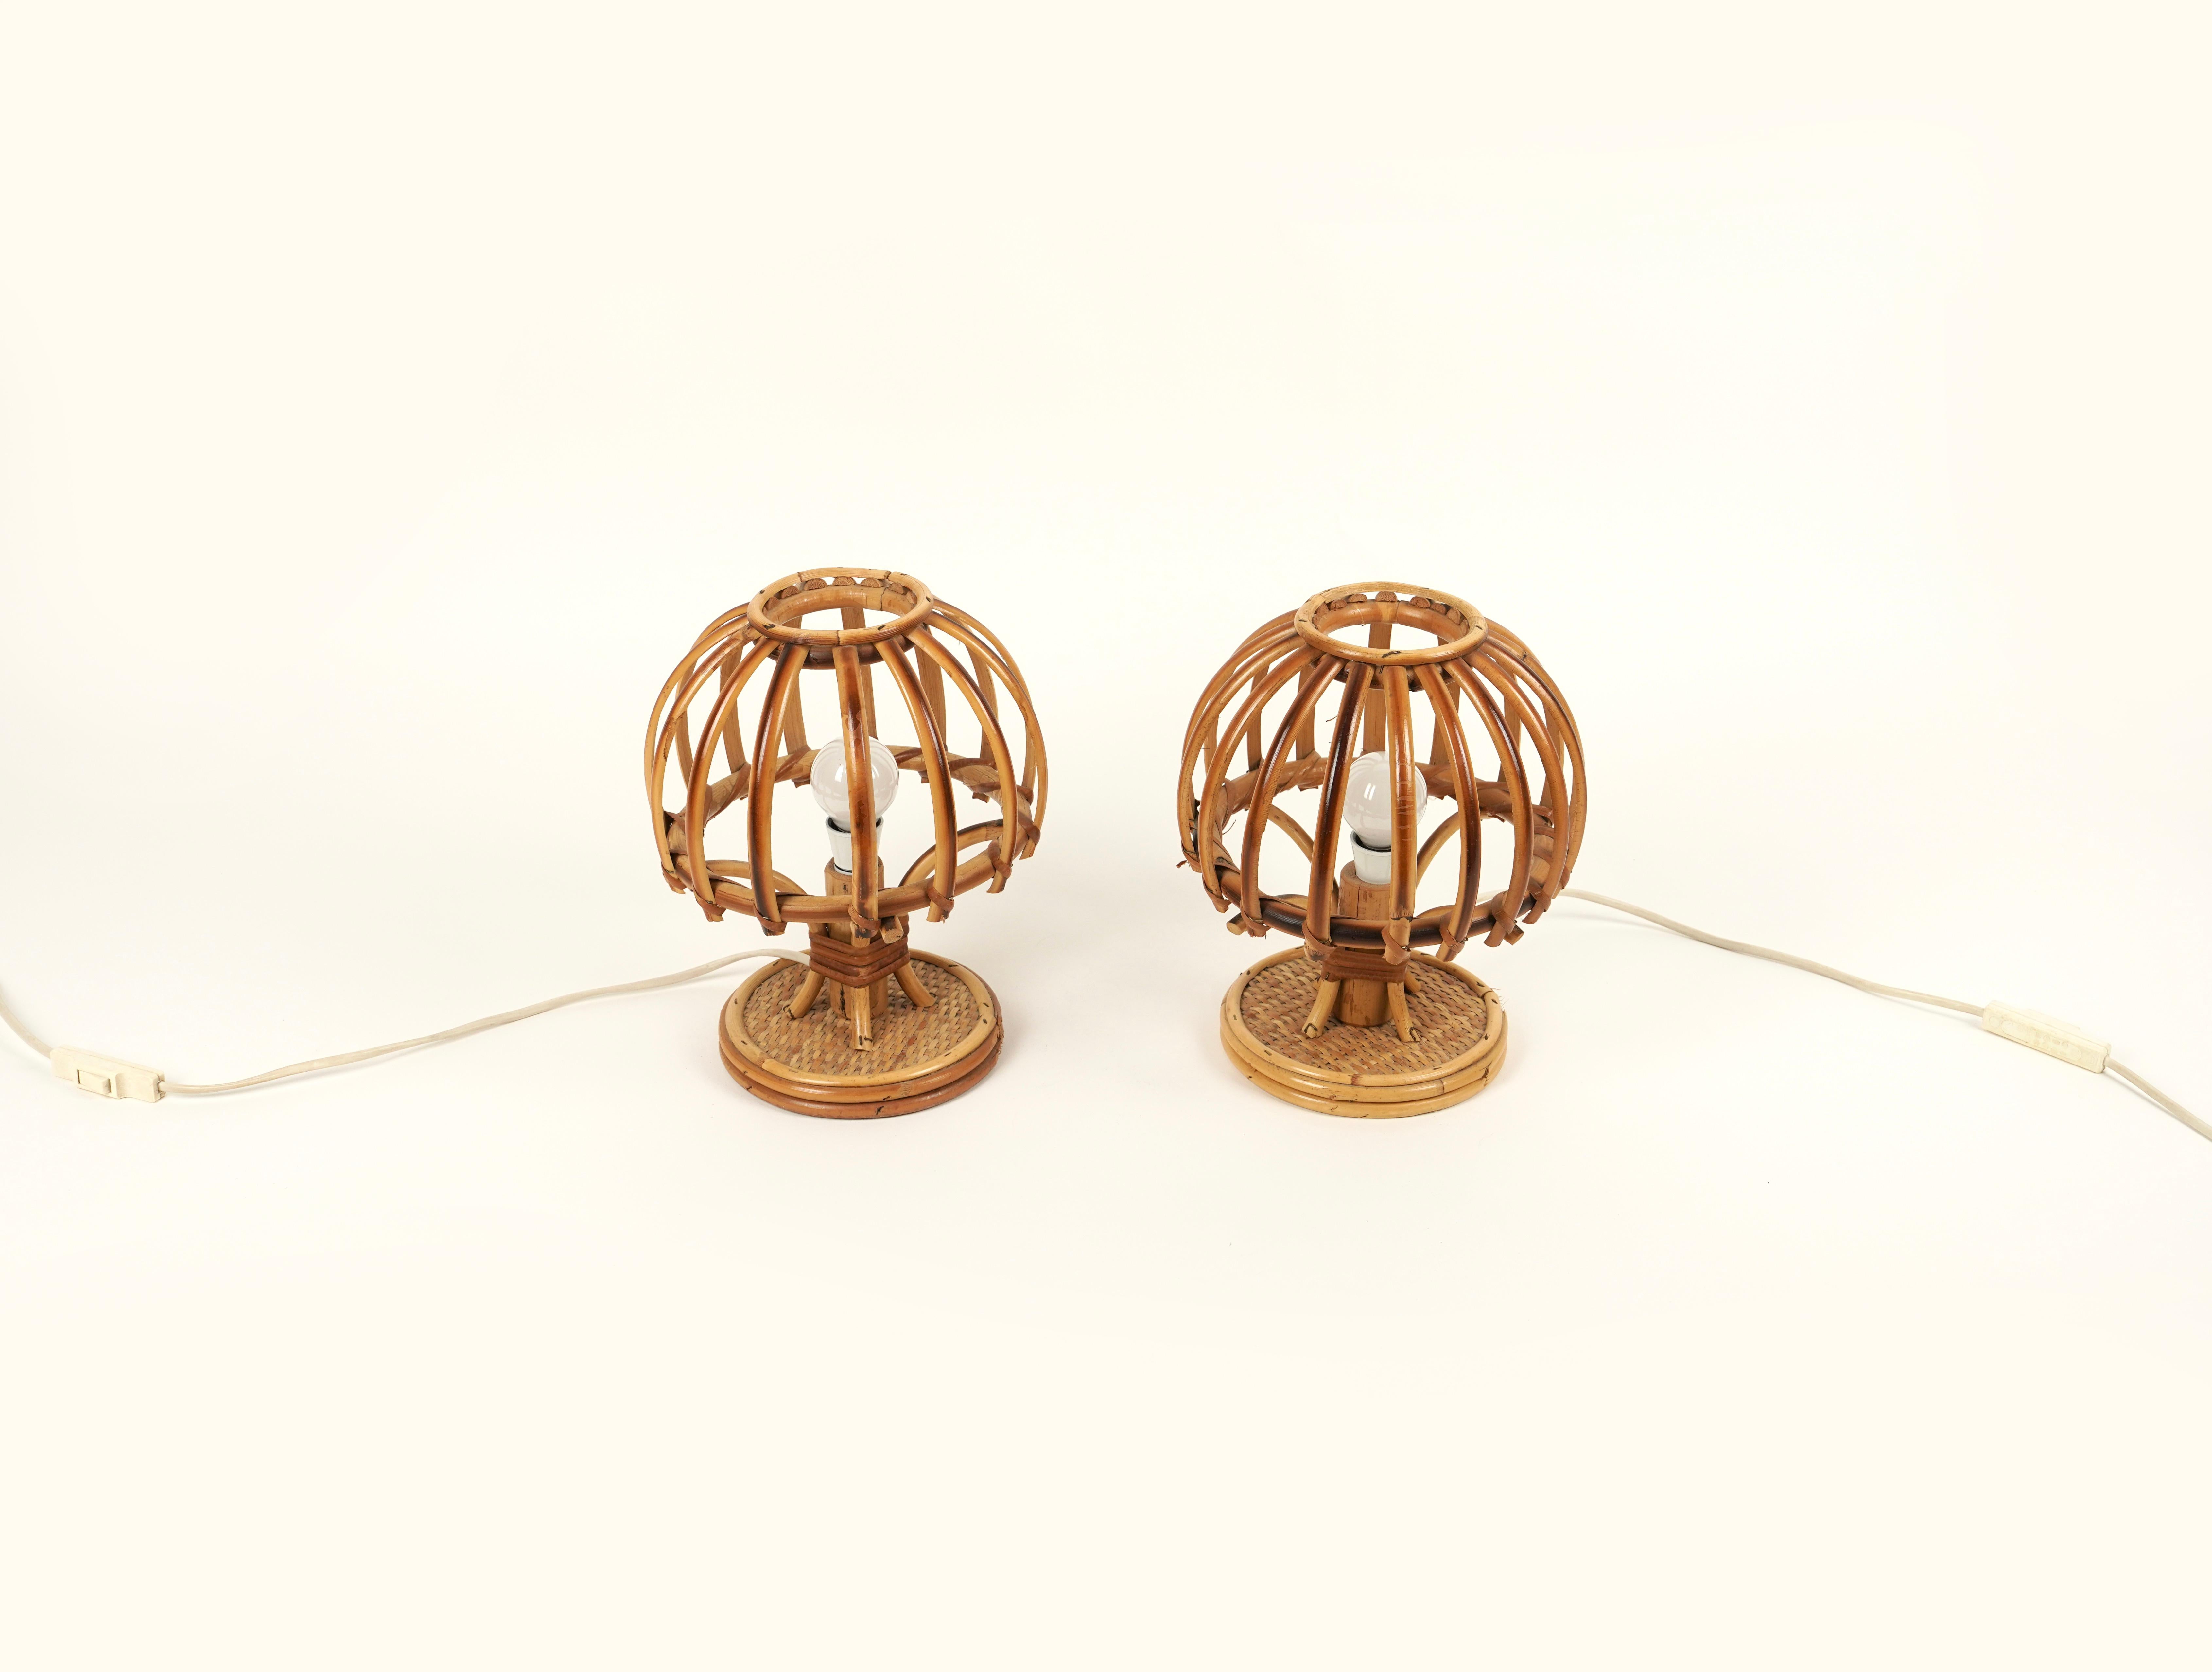 Midcentury Bamboo and Rattan Pair of Table Lamps Louis Sognot Style Italy, 1970s For Sale 1